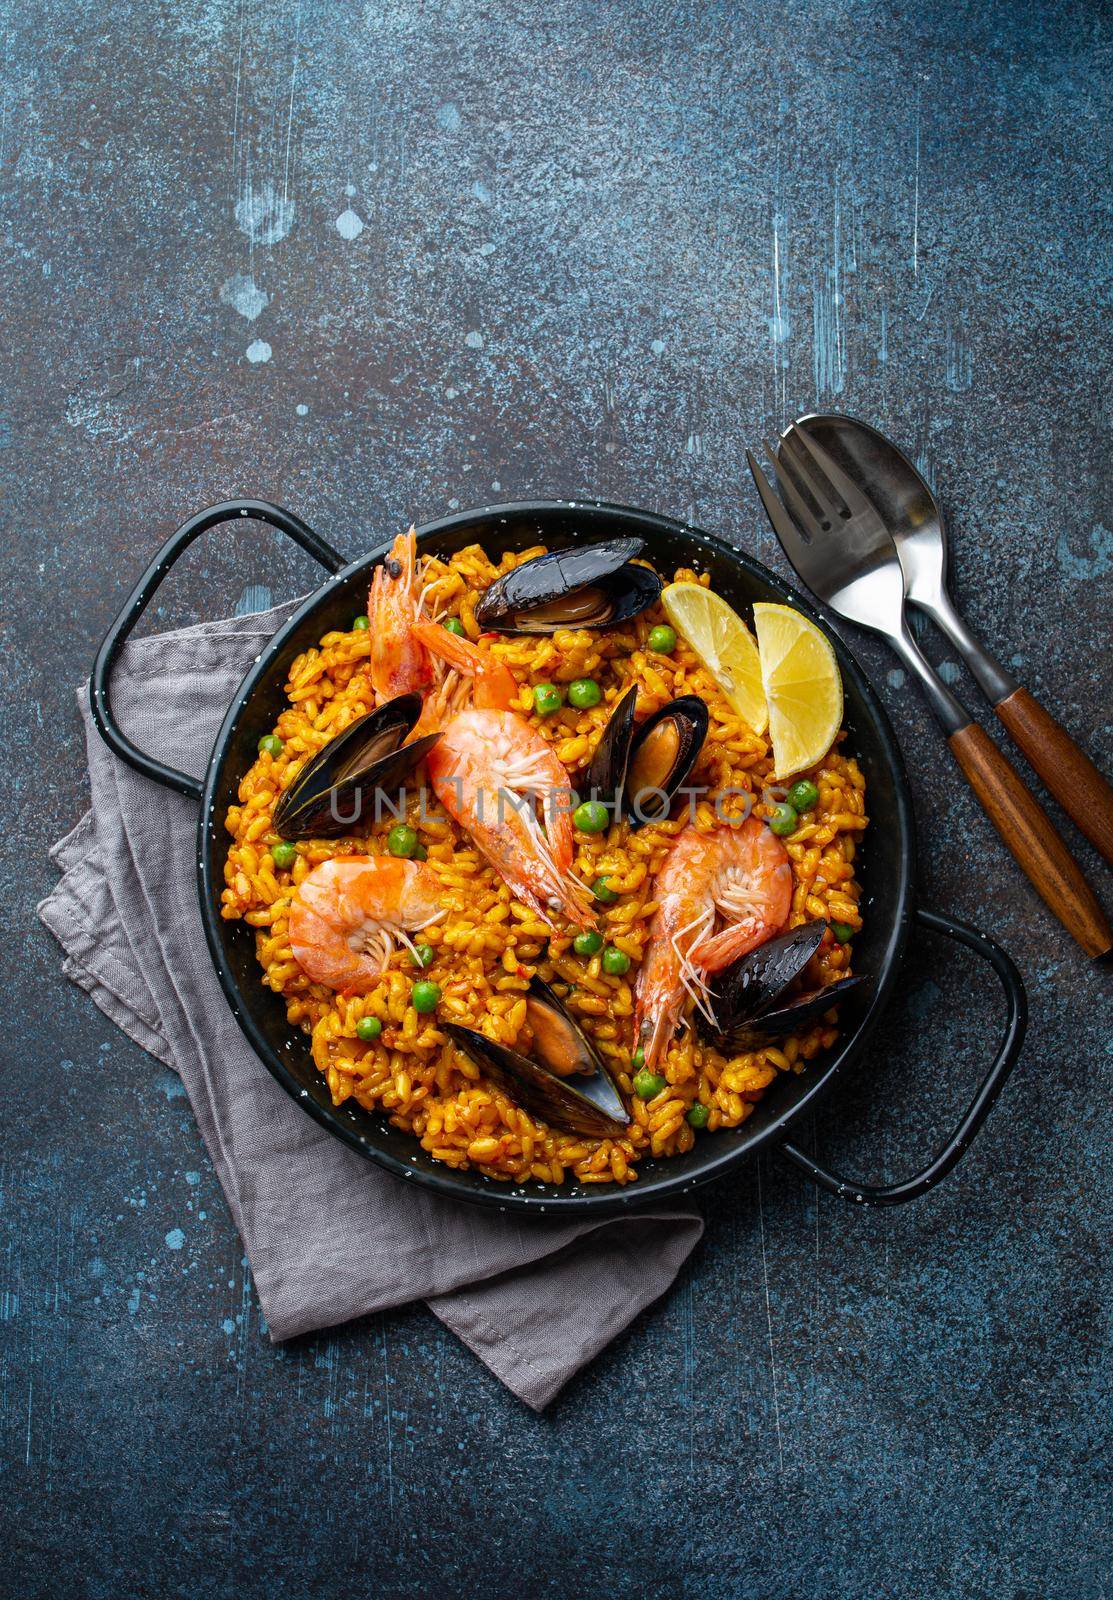 Classic dish of Spain, seafood paella in traditional pan on rustic blue concrete background top view. Spanish paella with shrimps, clamps, mussels, green peas and fresh lemon wedges from above .